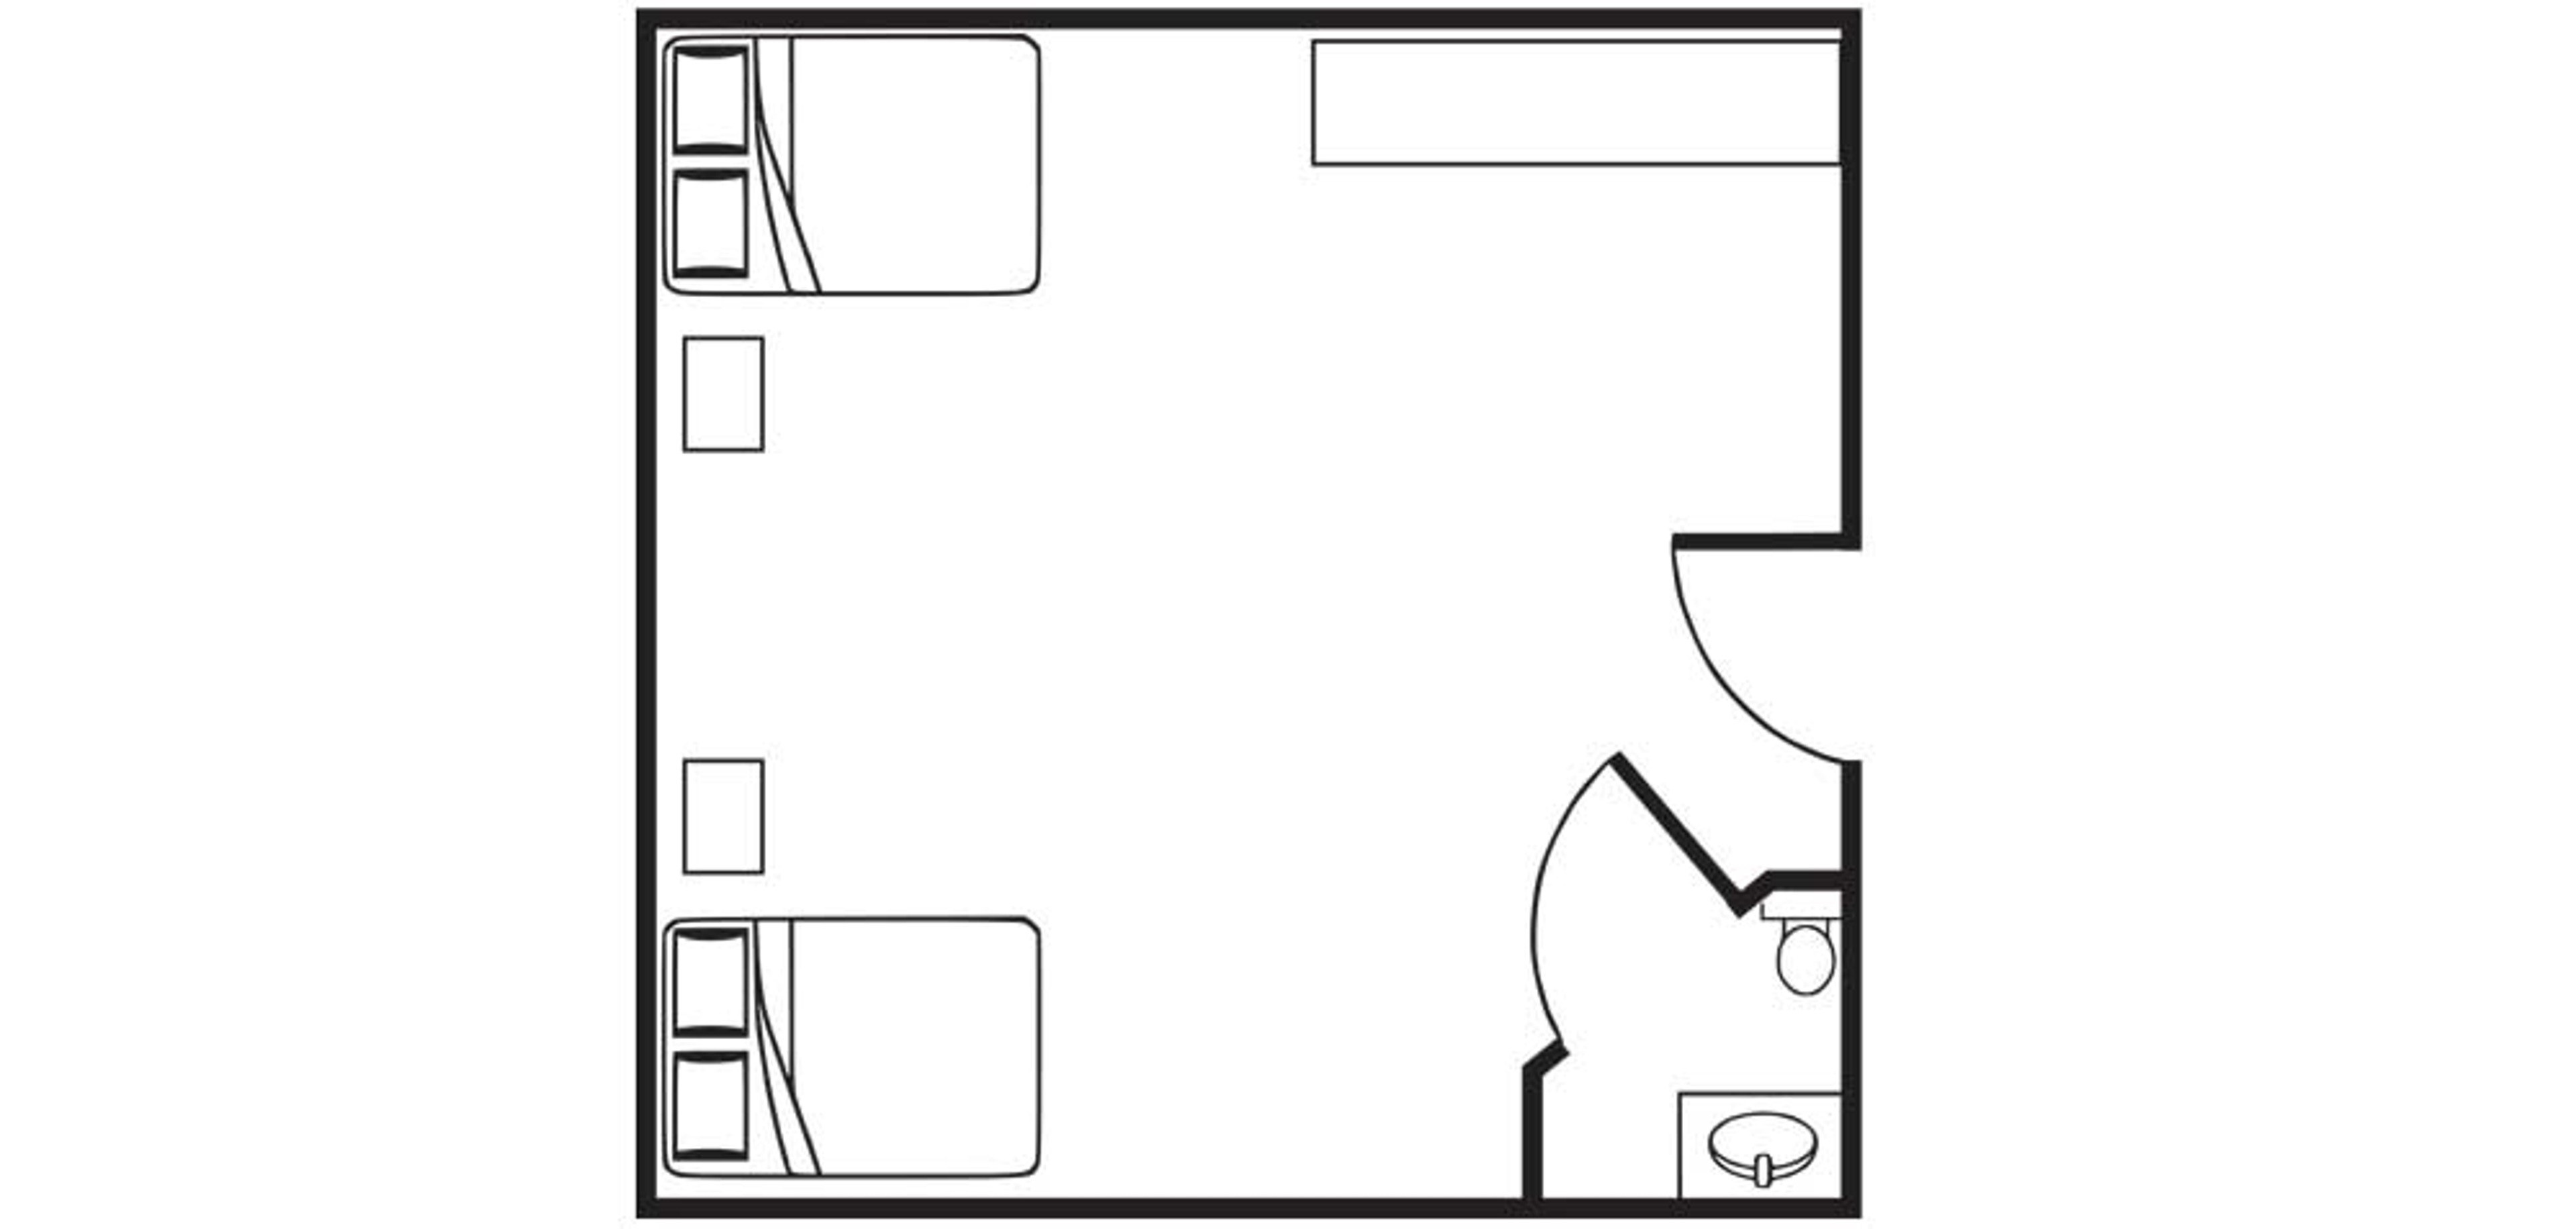 Floorplan - Crescent Landing at South Coast - Shared suite Memory Care